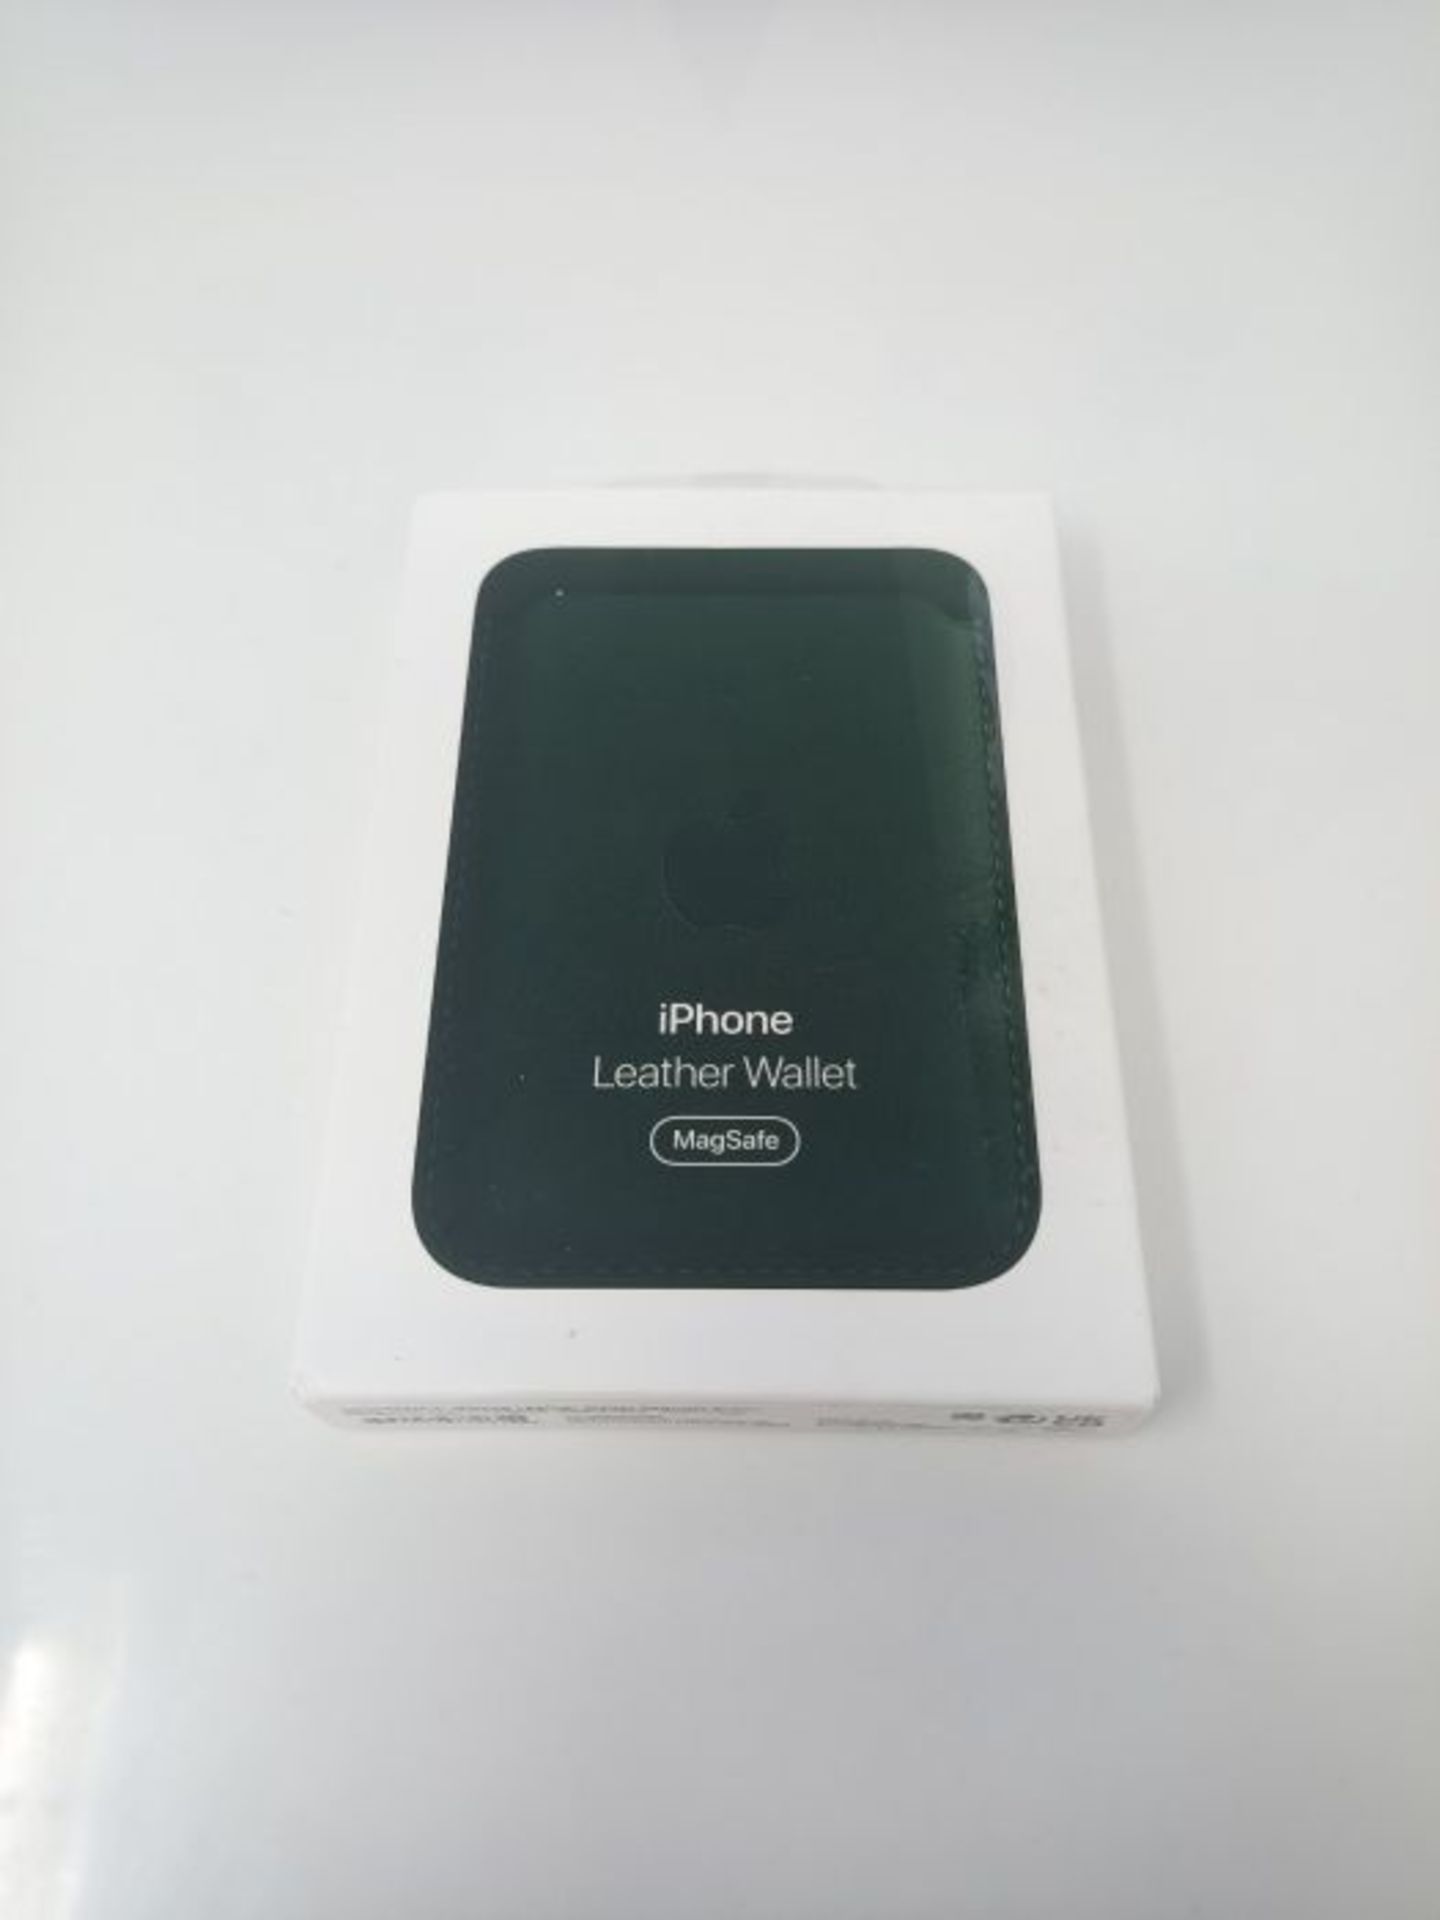 Apple Leather Wallet with MagSafe (for iPhone) - Sequoia Green - Image 2 of 3